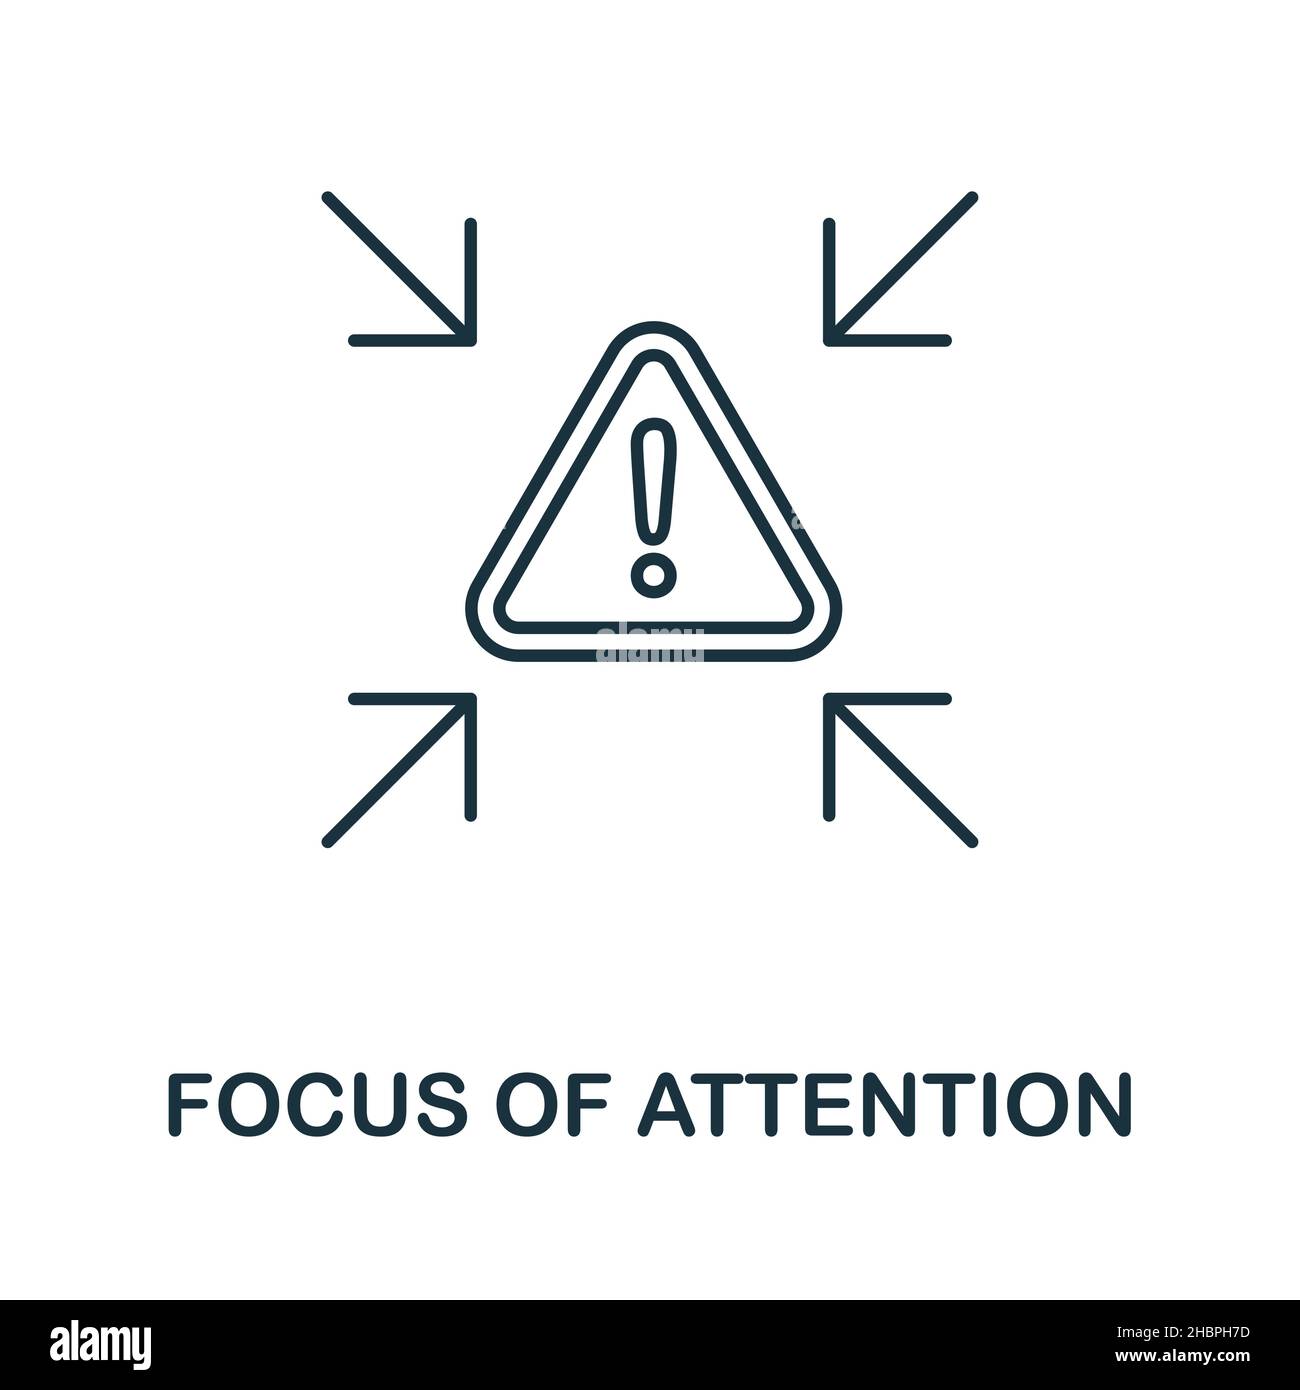 Focus Of Attention icon. Line element from cognitive skills collection. Linear Focus Of Attention icon sign for web design, infographics and more. Stock Vector